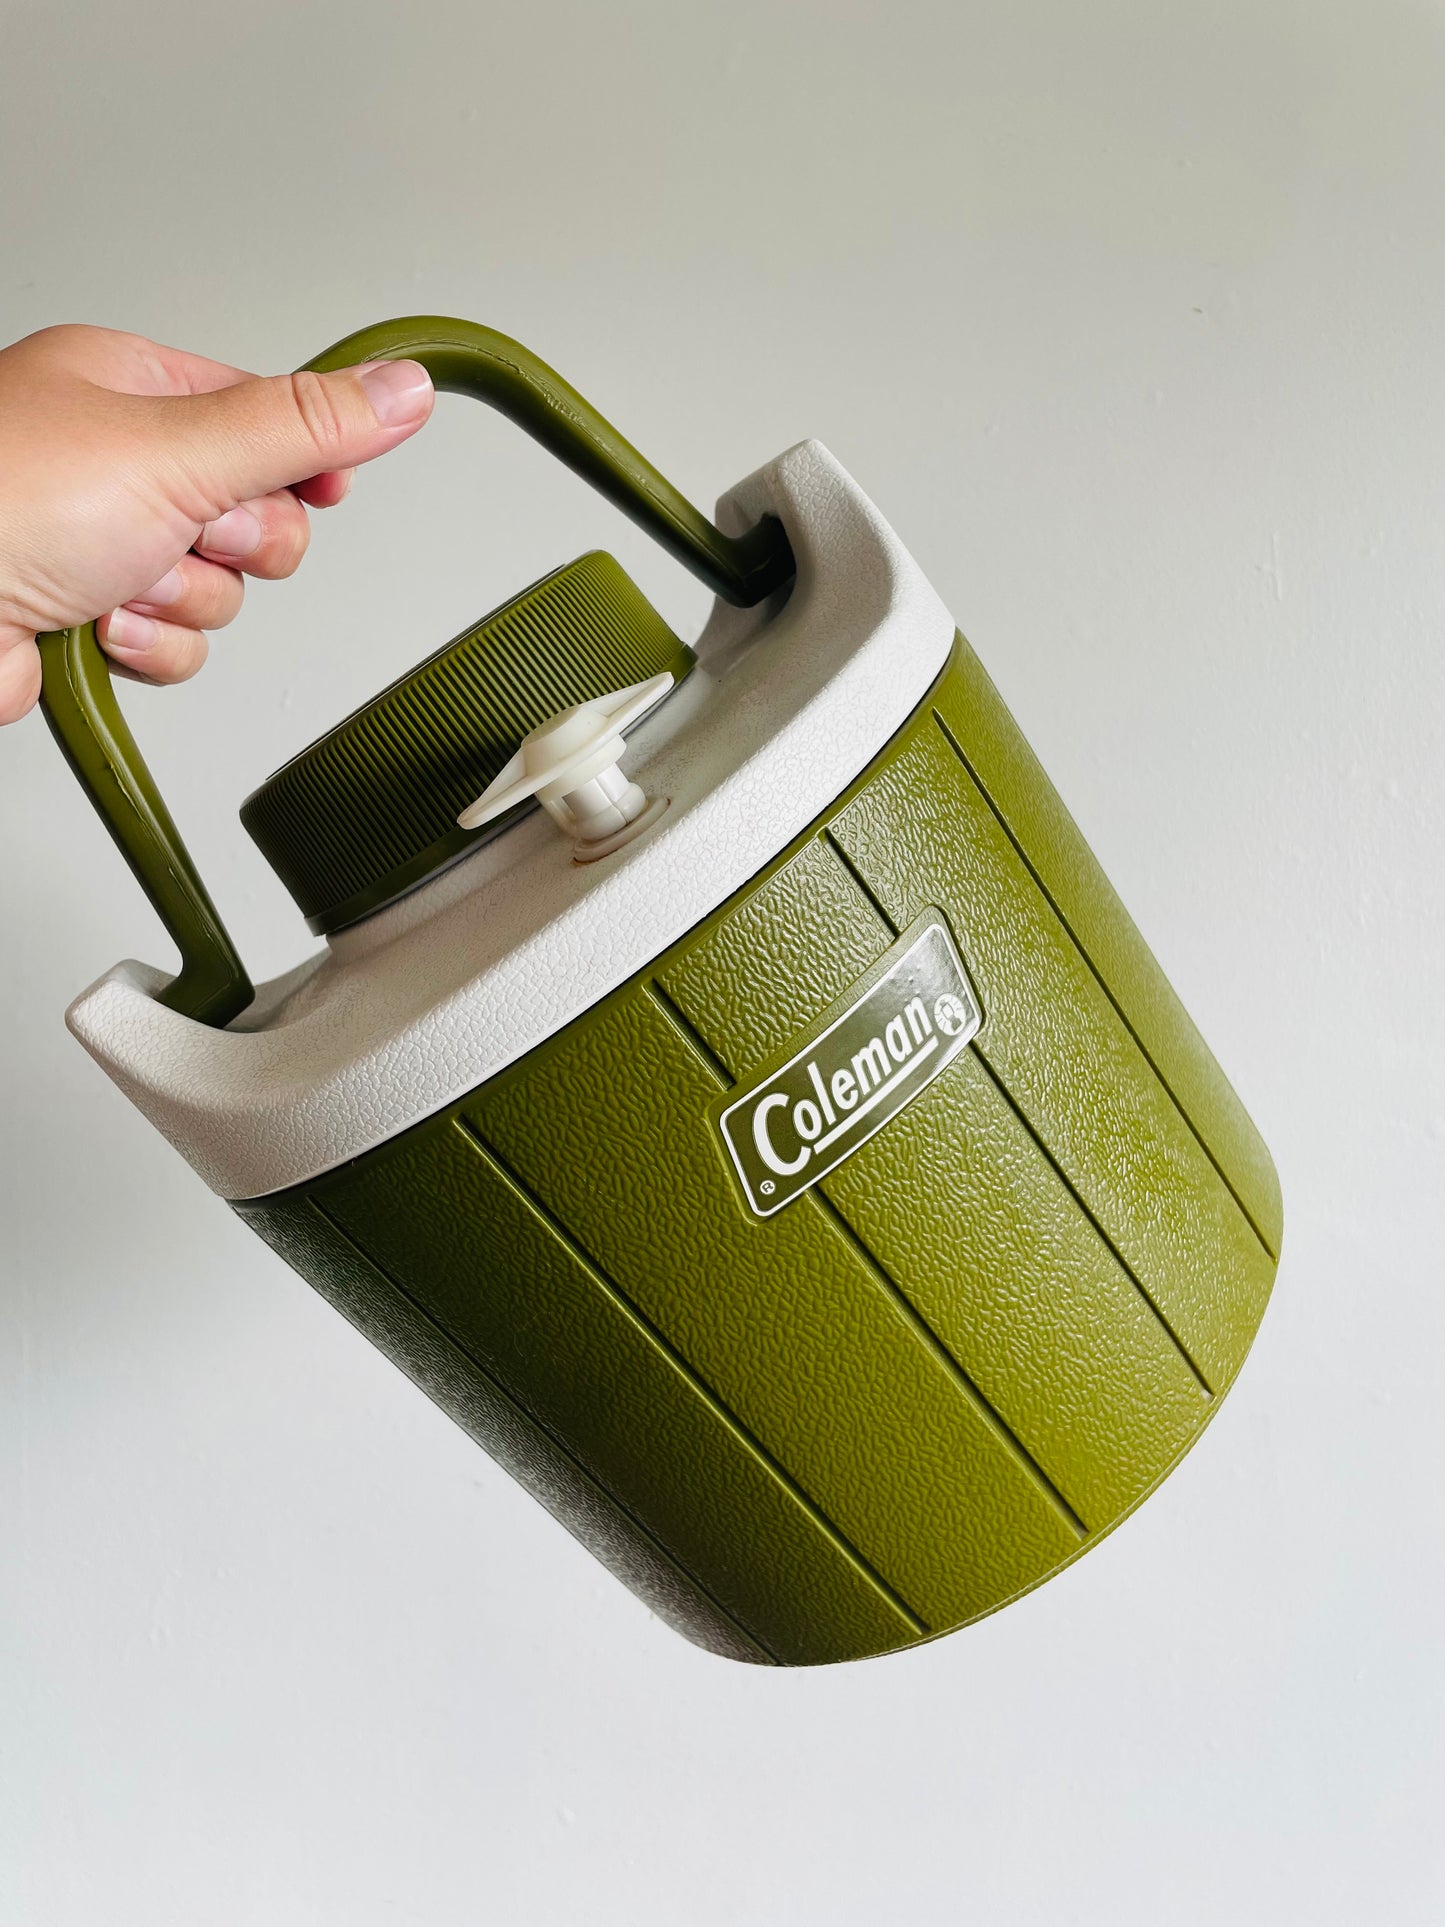 Olive Green Coleman Insulated Water Dispenser Jug - Made in Canada